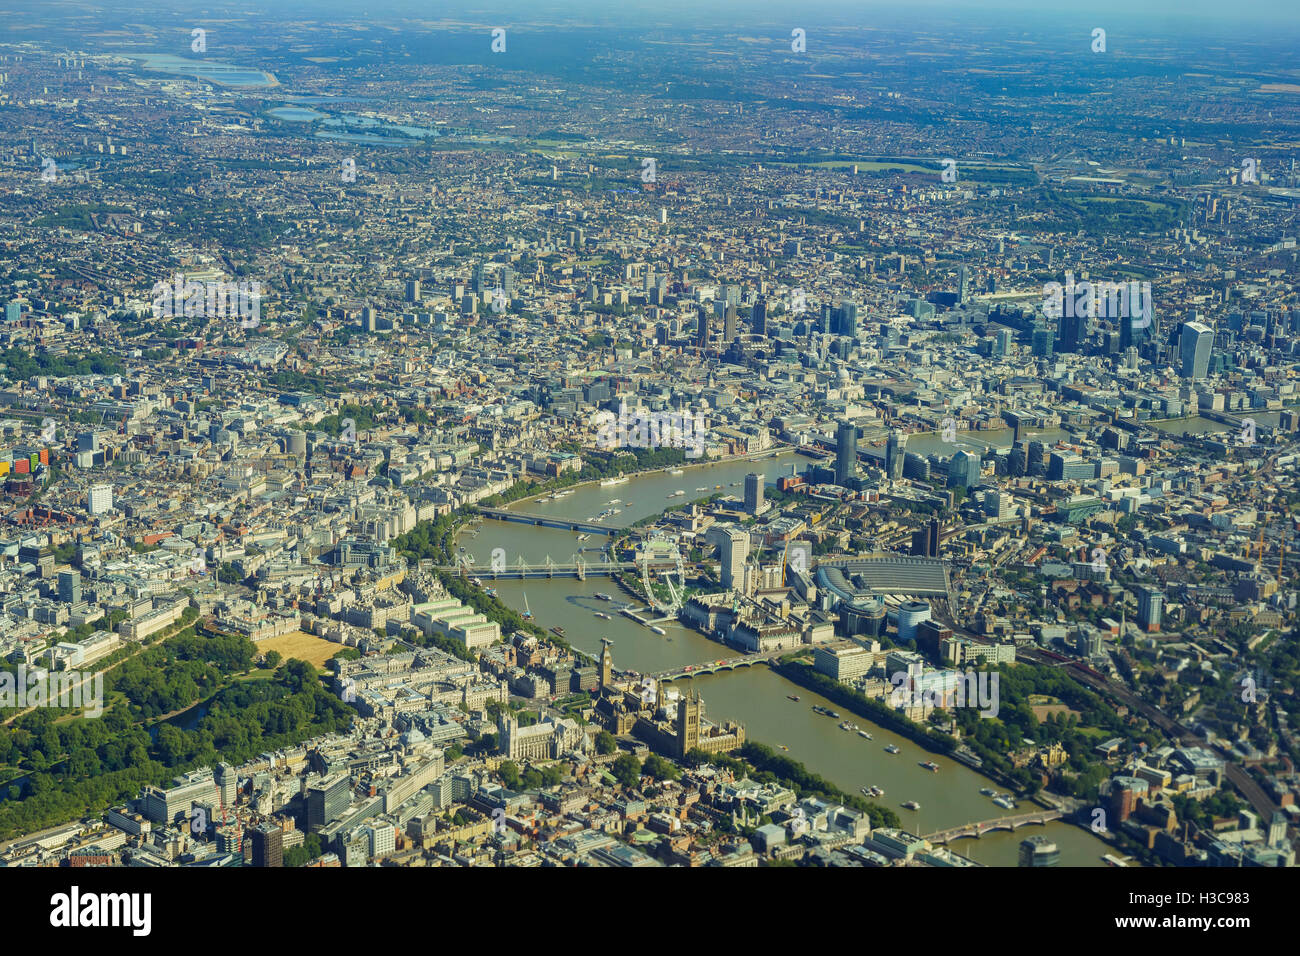 Aerial view of St James's Park, Westminster, Lambeth, Waterloo, Covent Garden, Holborn, Temple of London, United Kingdom Stock Photo